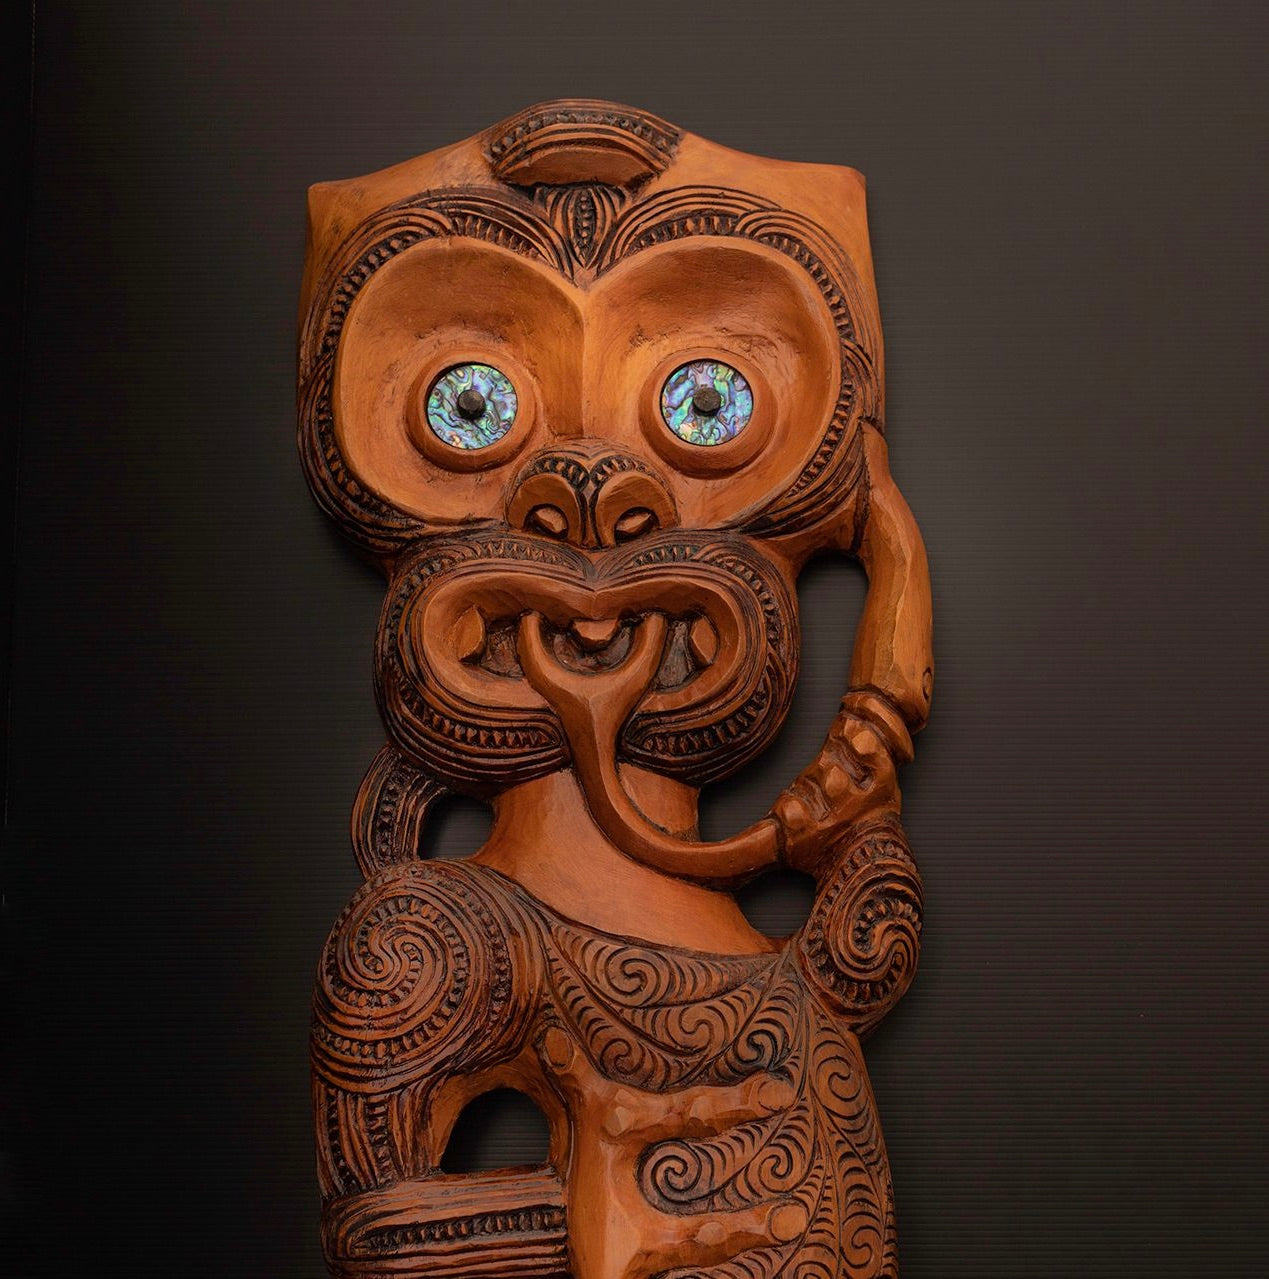 Detail of New Zealand Maori Taniwha Wood Carving by Gary Holder Silver Fern Gallery